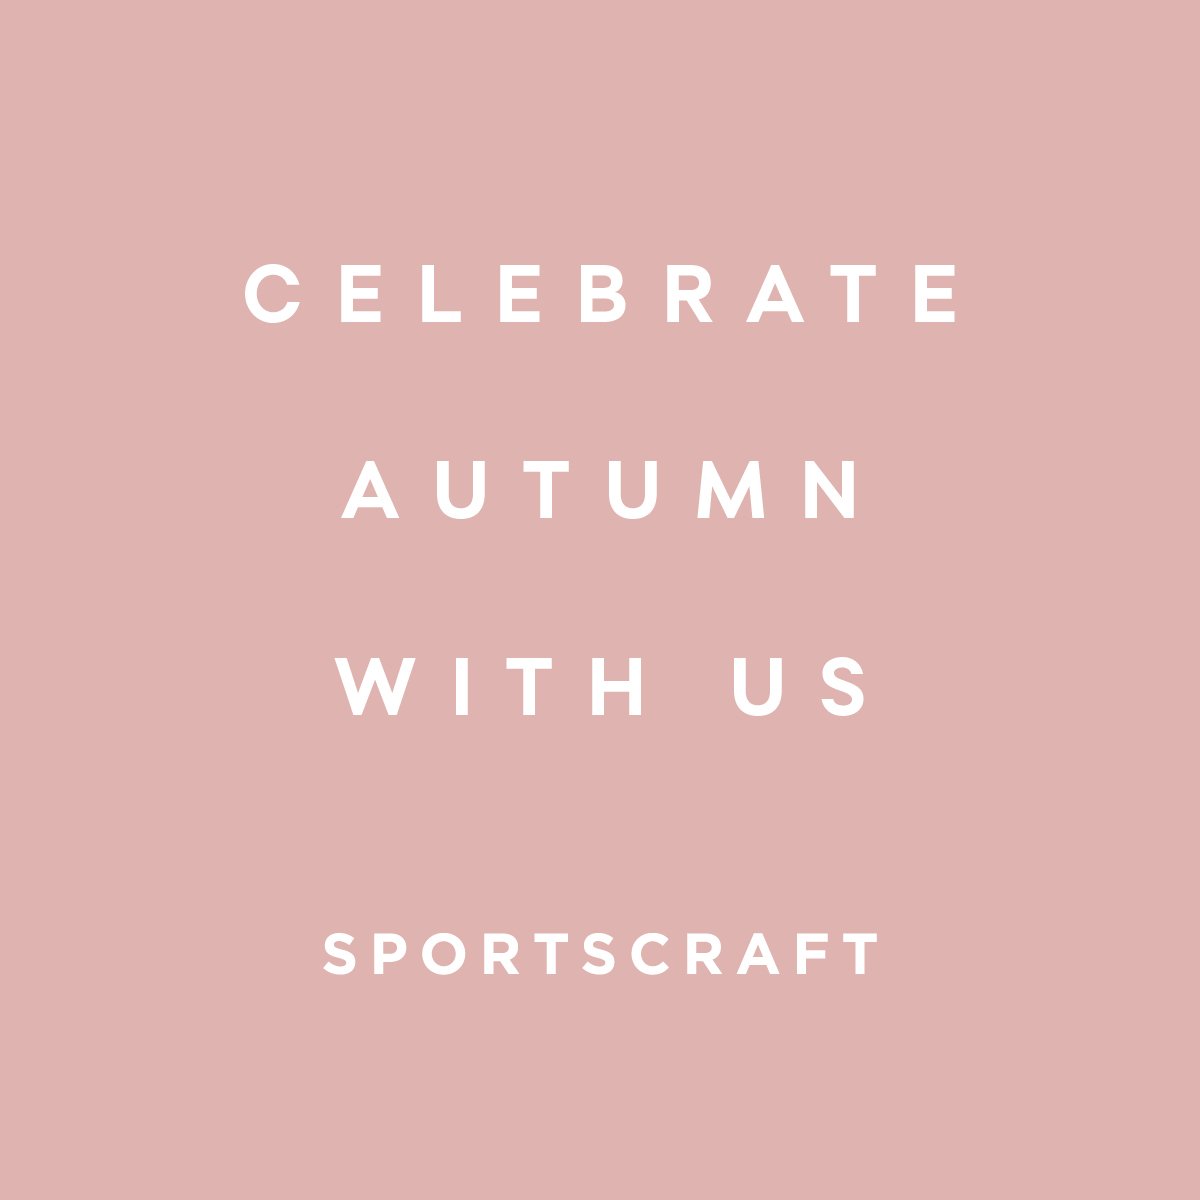 Celebrate autumn with us in store and online tomorrow. Stay tuned for details! #SAVETHEDATE goo.gl/HIZvSz